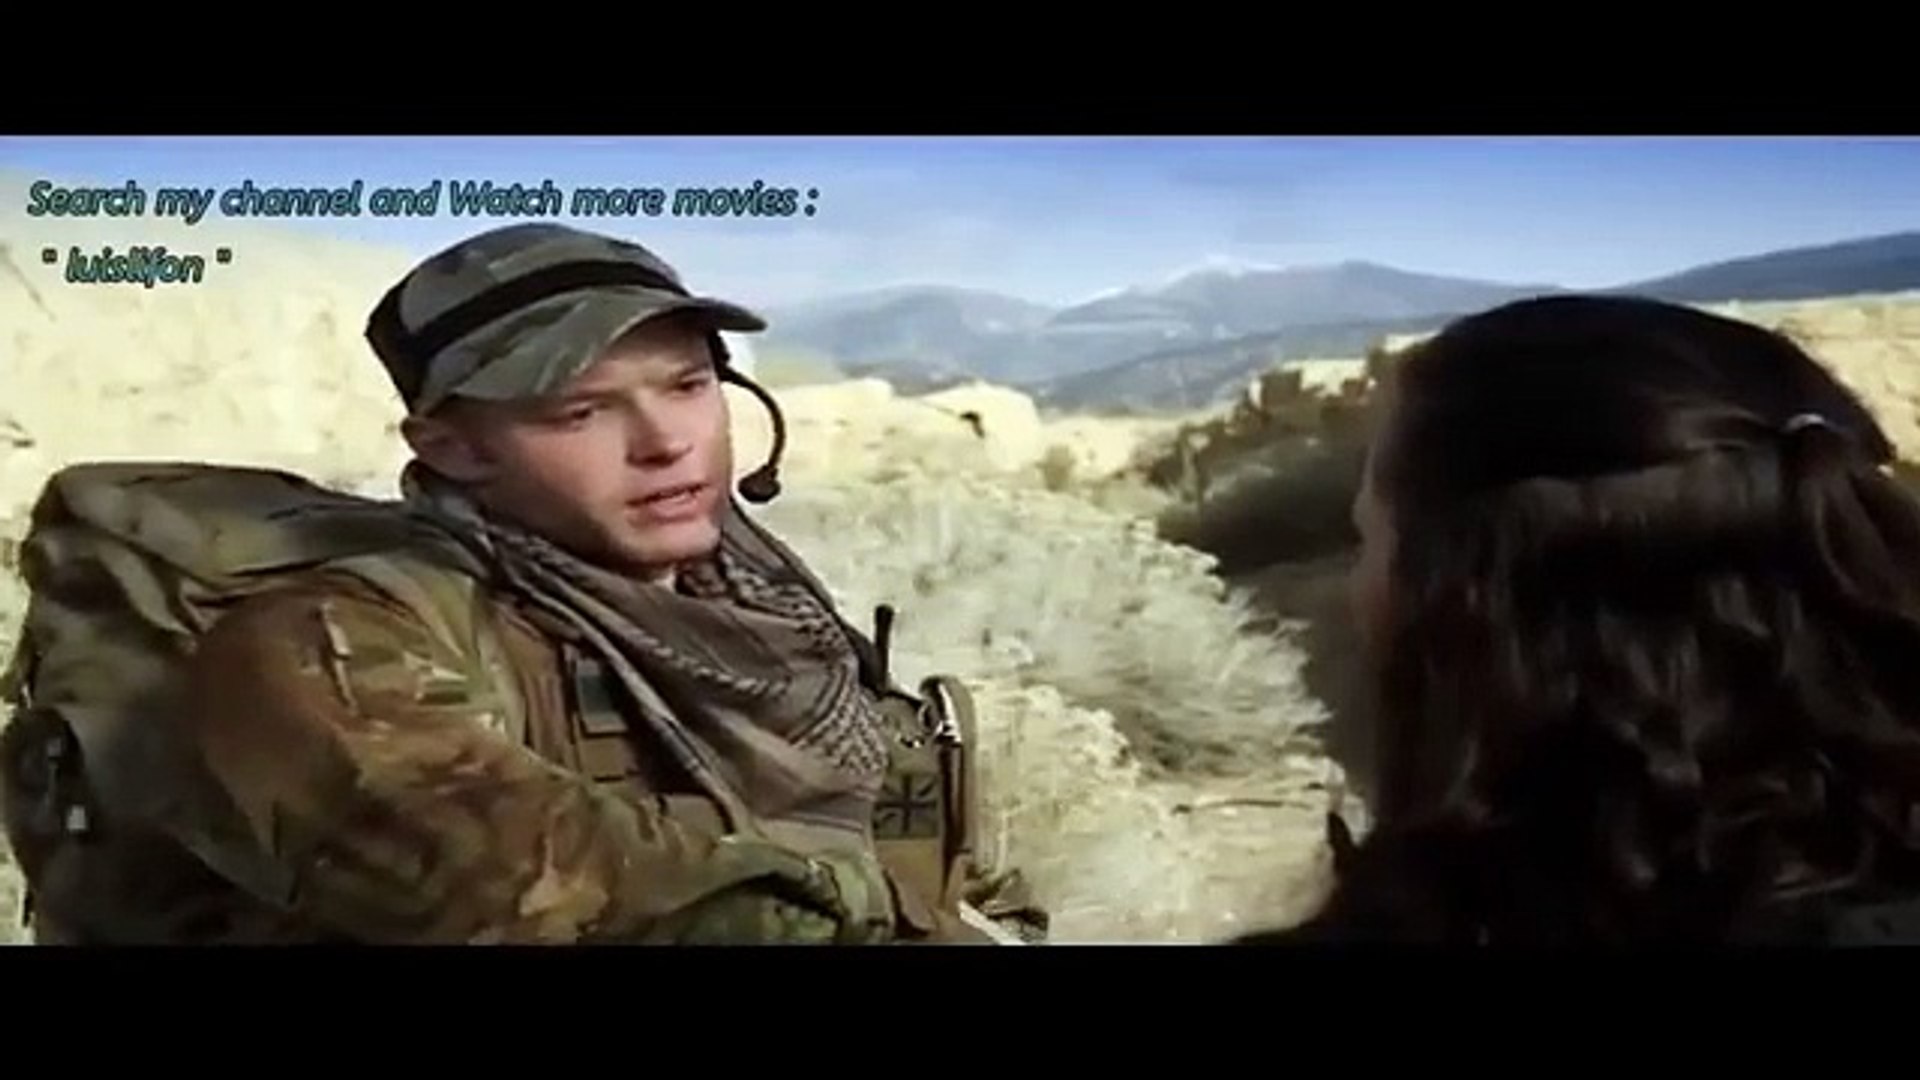 Devil Lands  Action Movies 2017  Best Action Sci Fi Movies Full Length English,Movies hd new cinema 